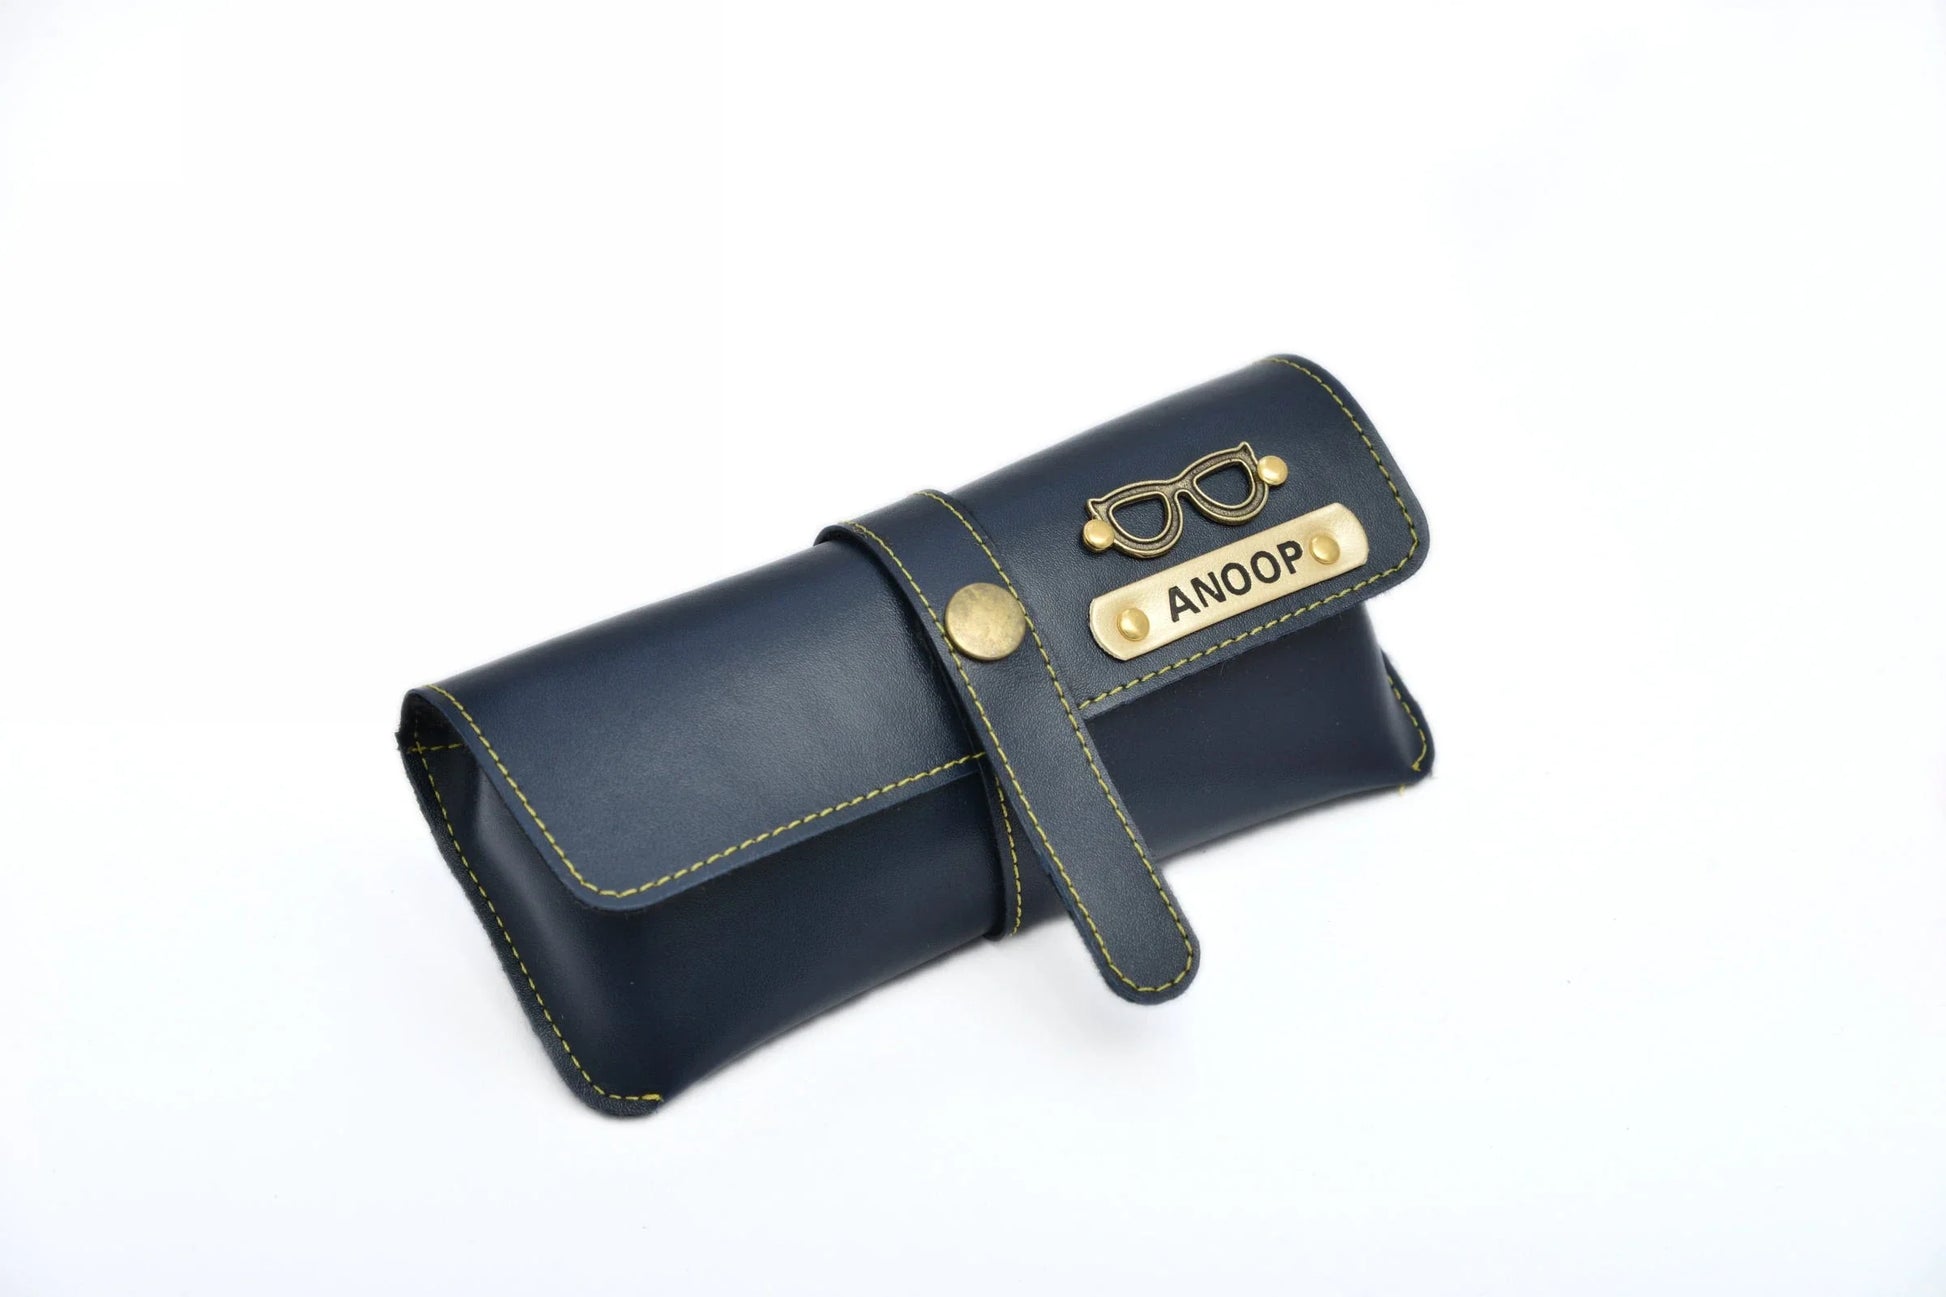 Protect your eyewear investment with our premium leather eyewear case.